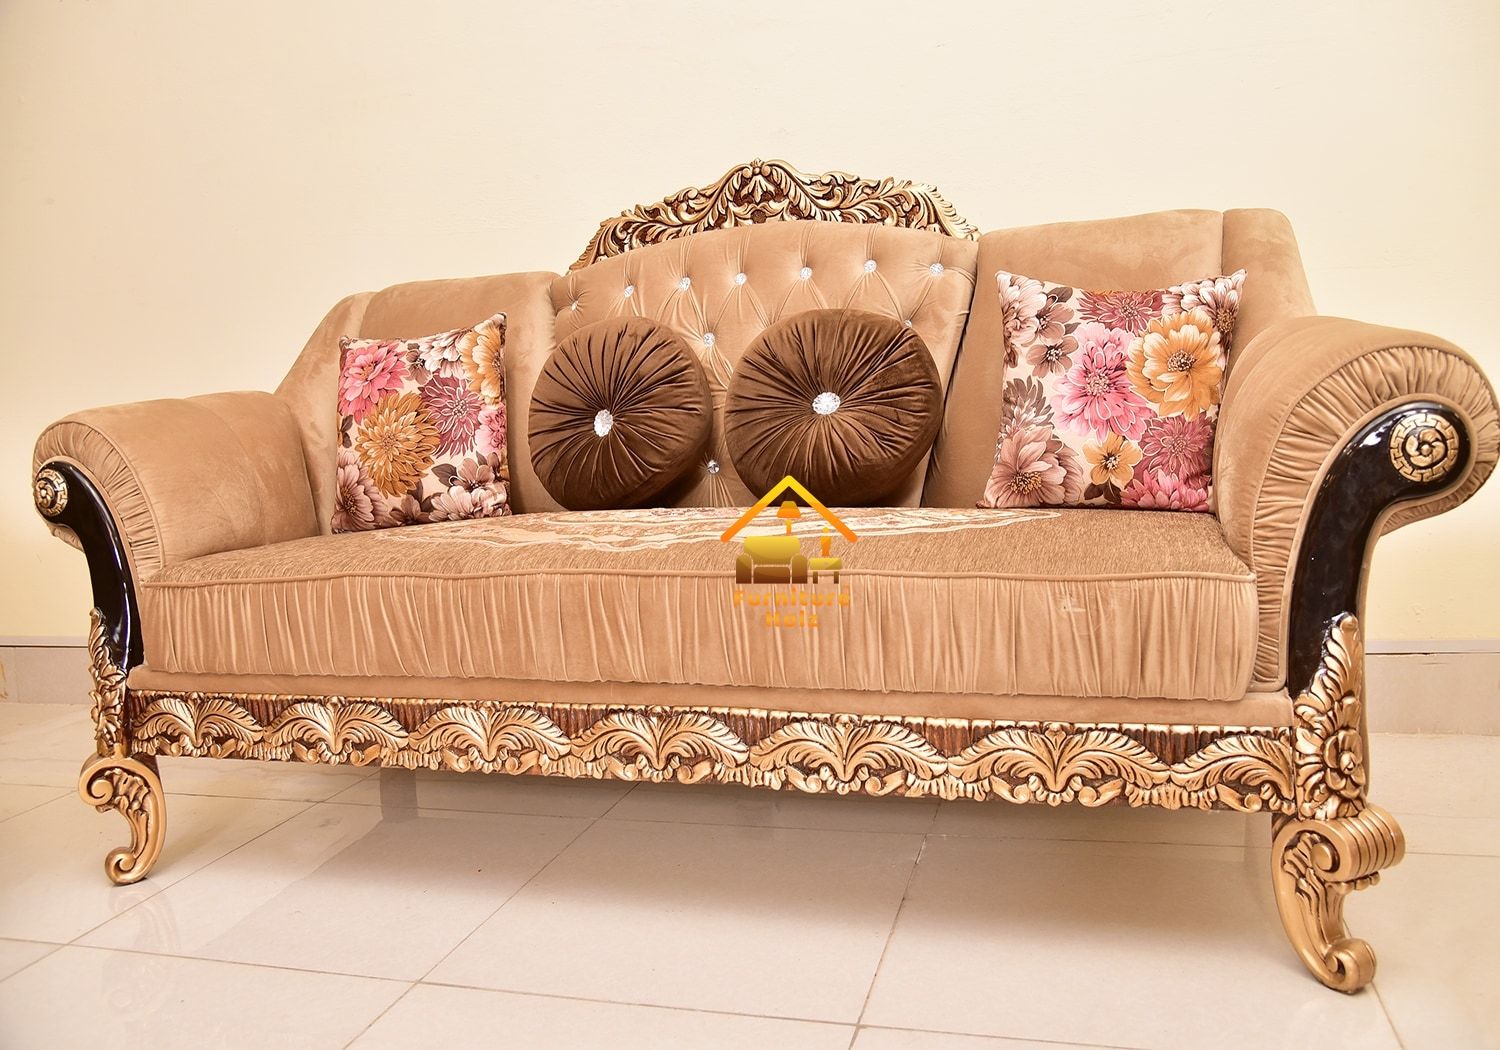 Victoria Palm Crown Six Seater 3 Piece Solid Wood Sofa Set Regarding 3 Piece Console Tables (View 20 of 20)